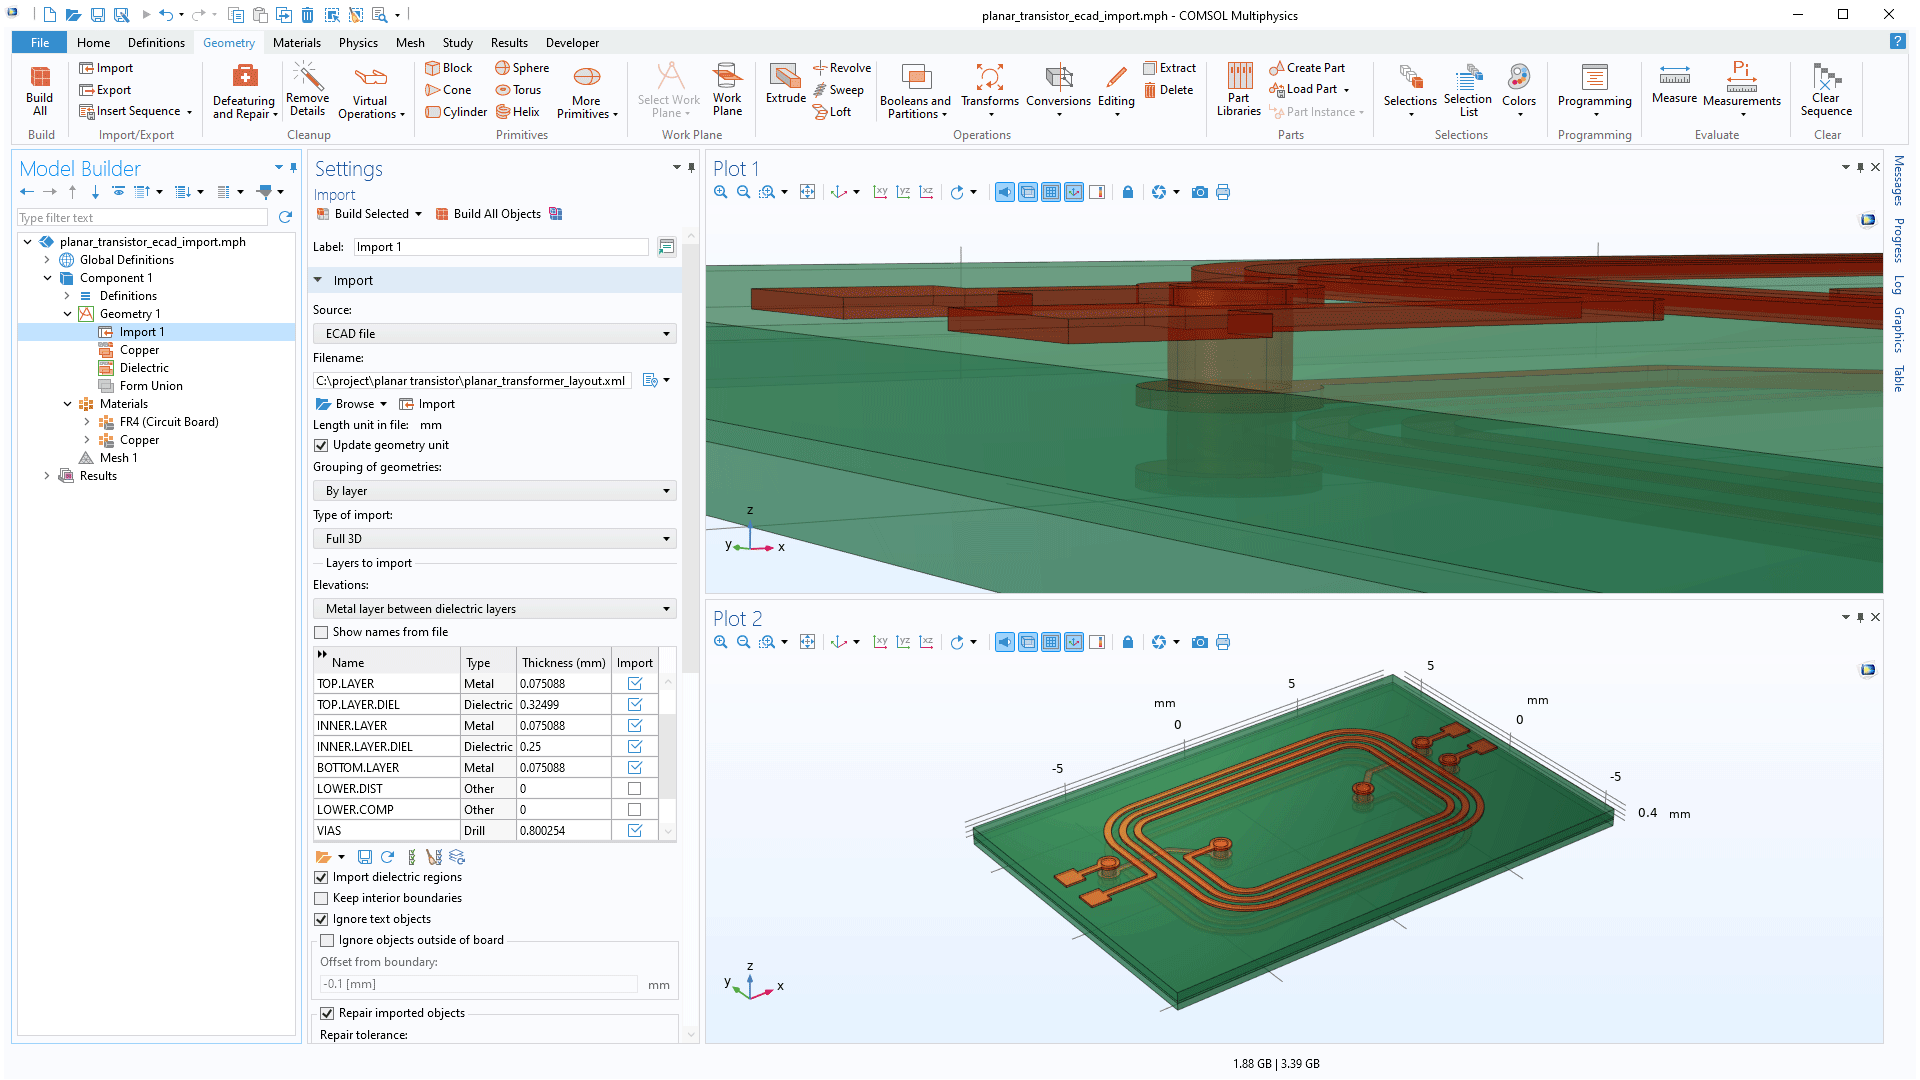 The COMSOL Multiphysics UI showing the Model Builder with the Import node highlighted, the corresponding Settings window, and two Graphics windows.